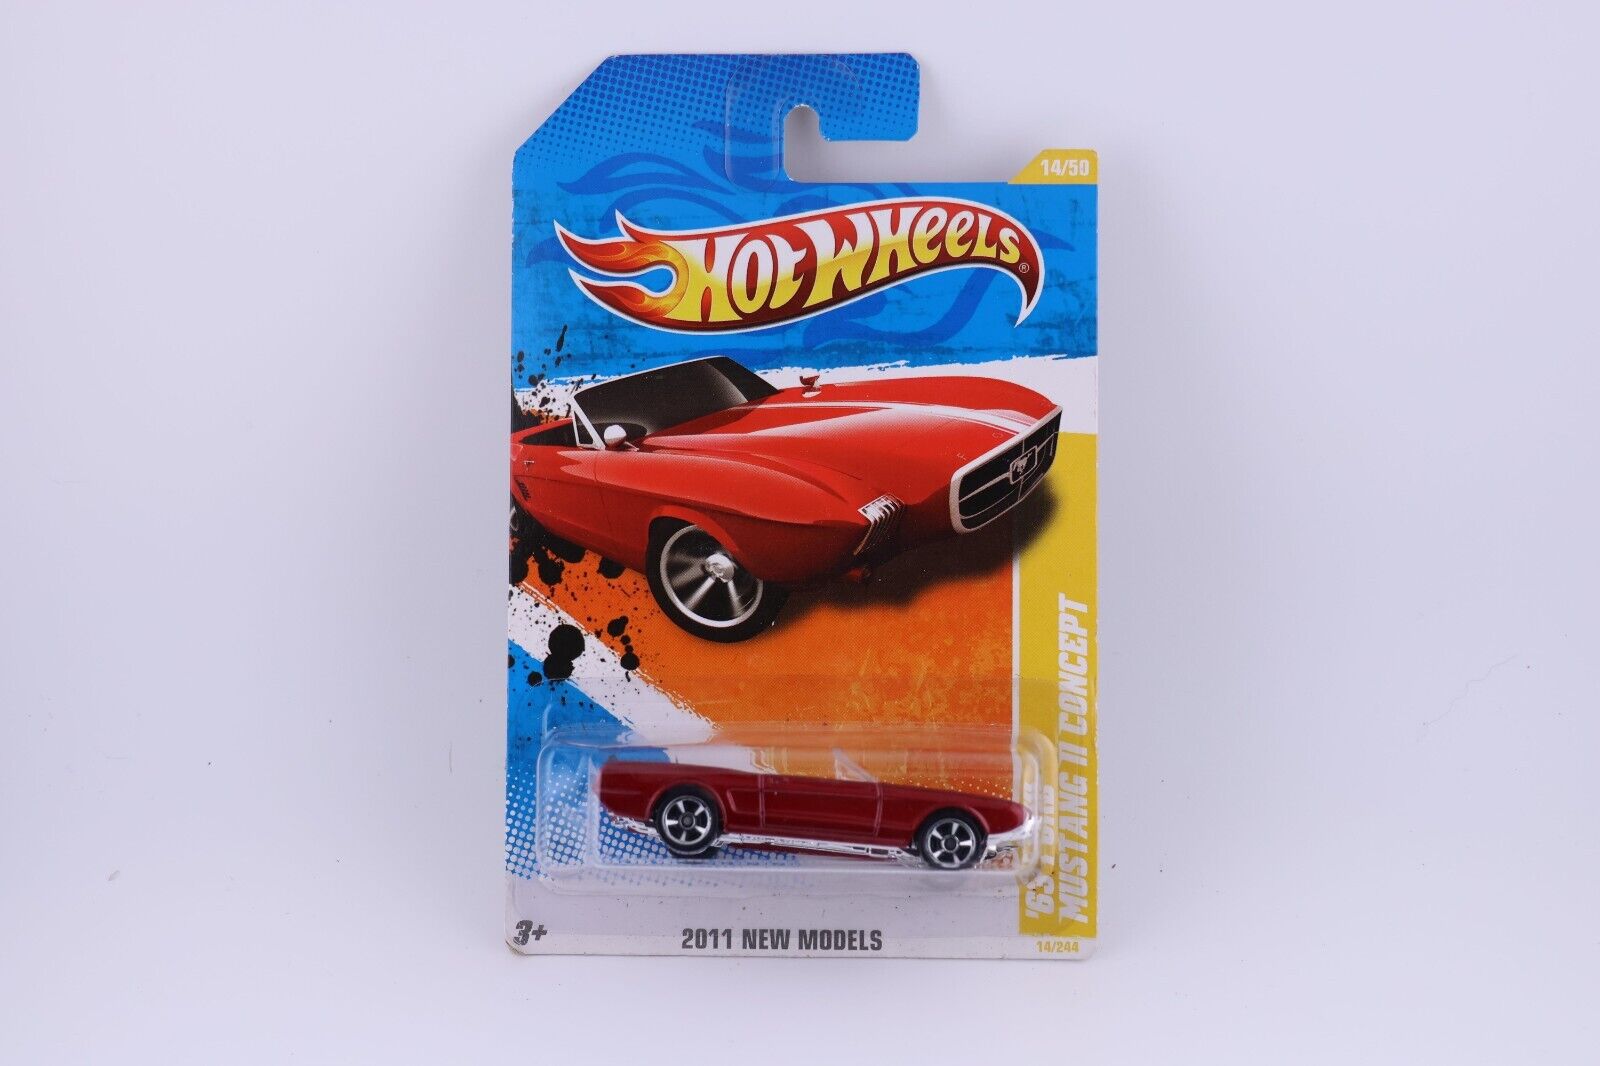  Hot Wheels \'63 Ford Mustang ll Concept 2011 New Models Red Diecast 1:64 Scale 